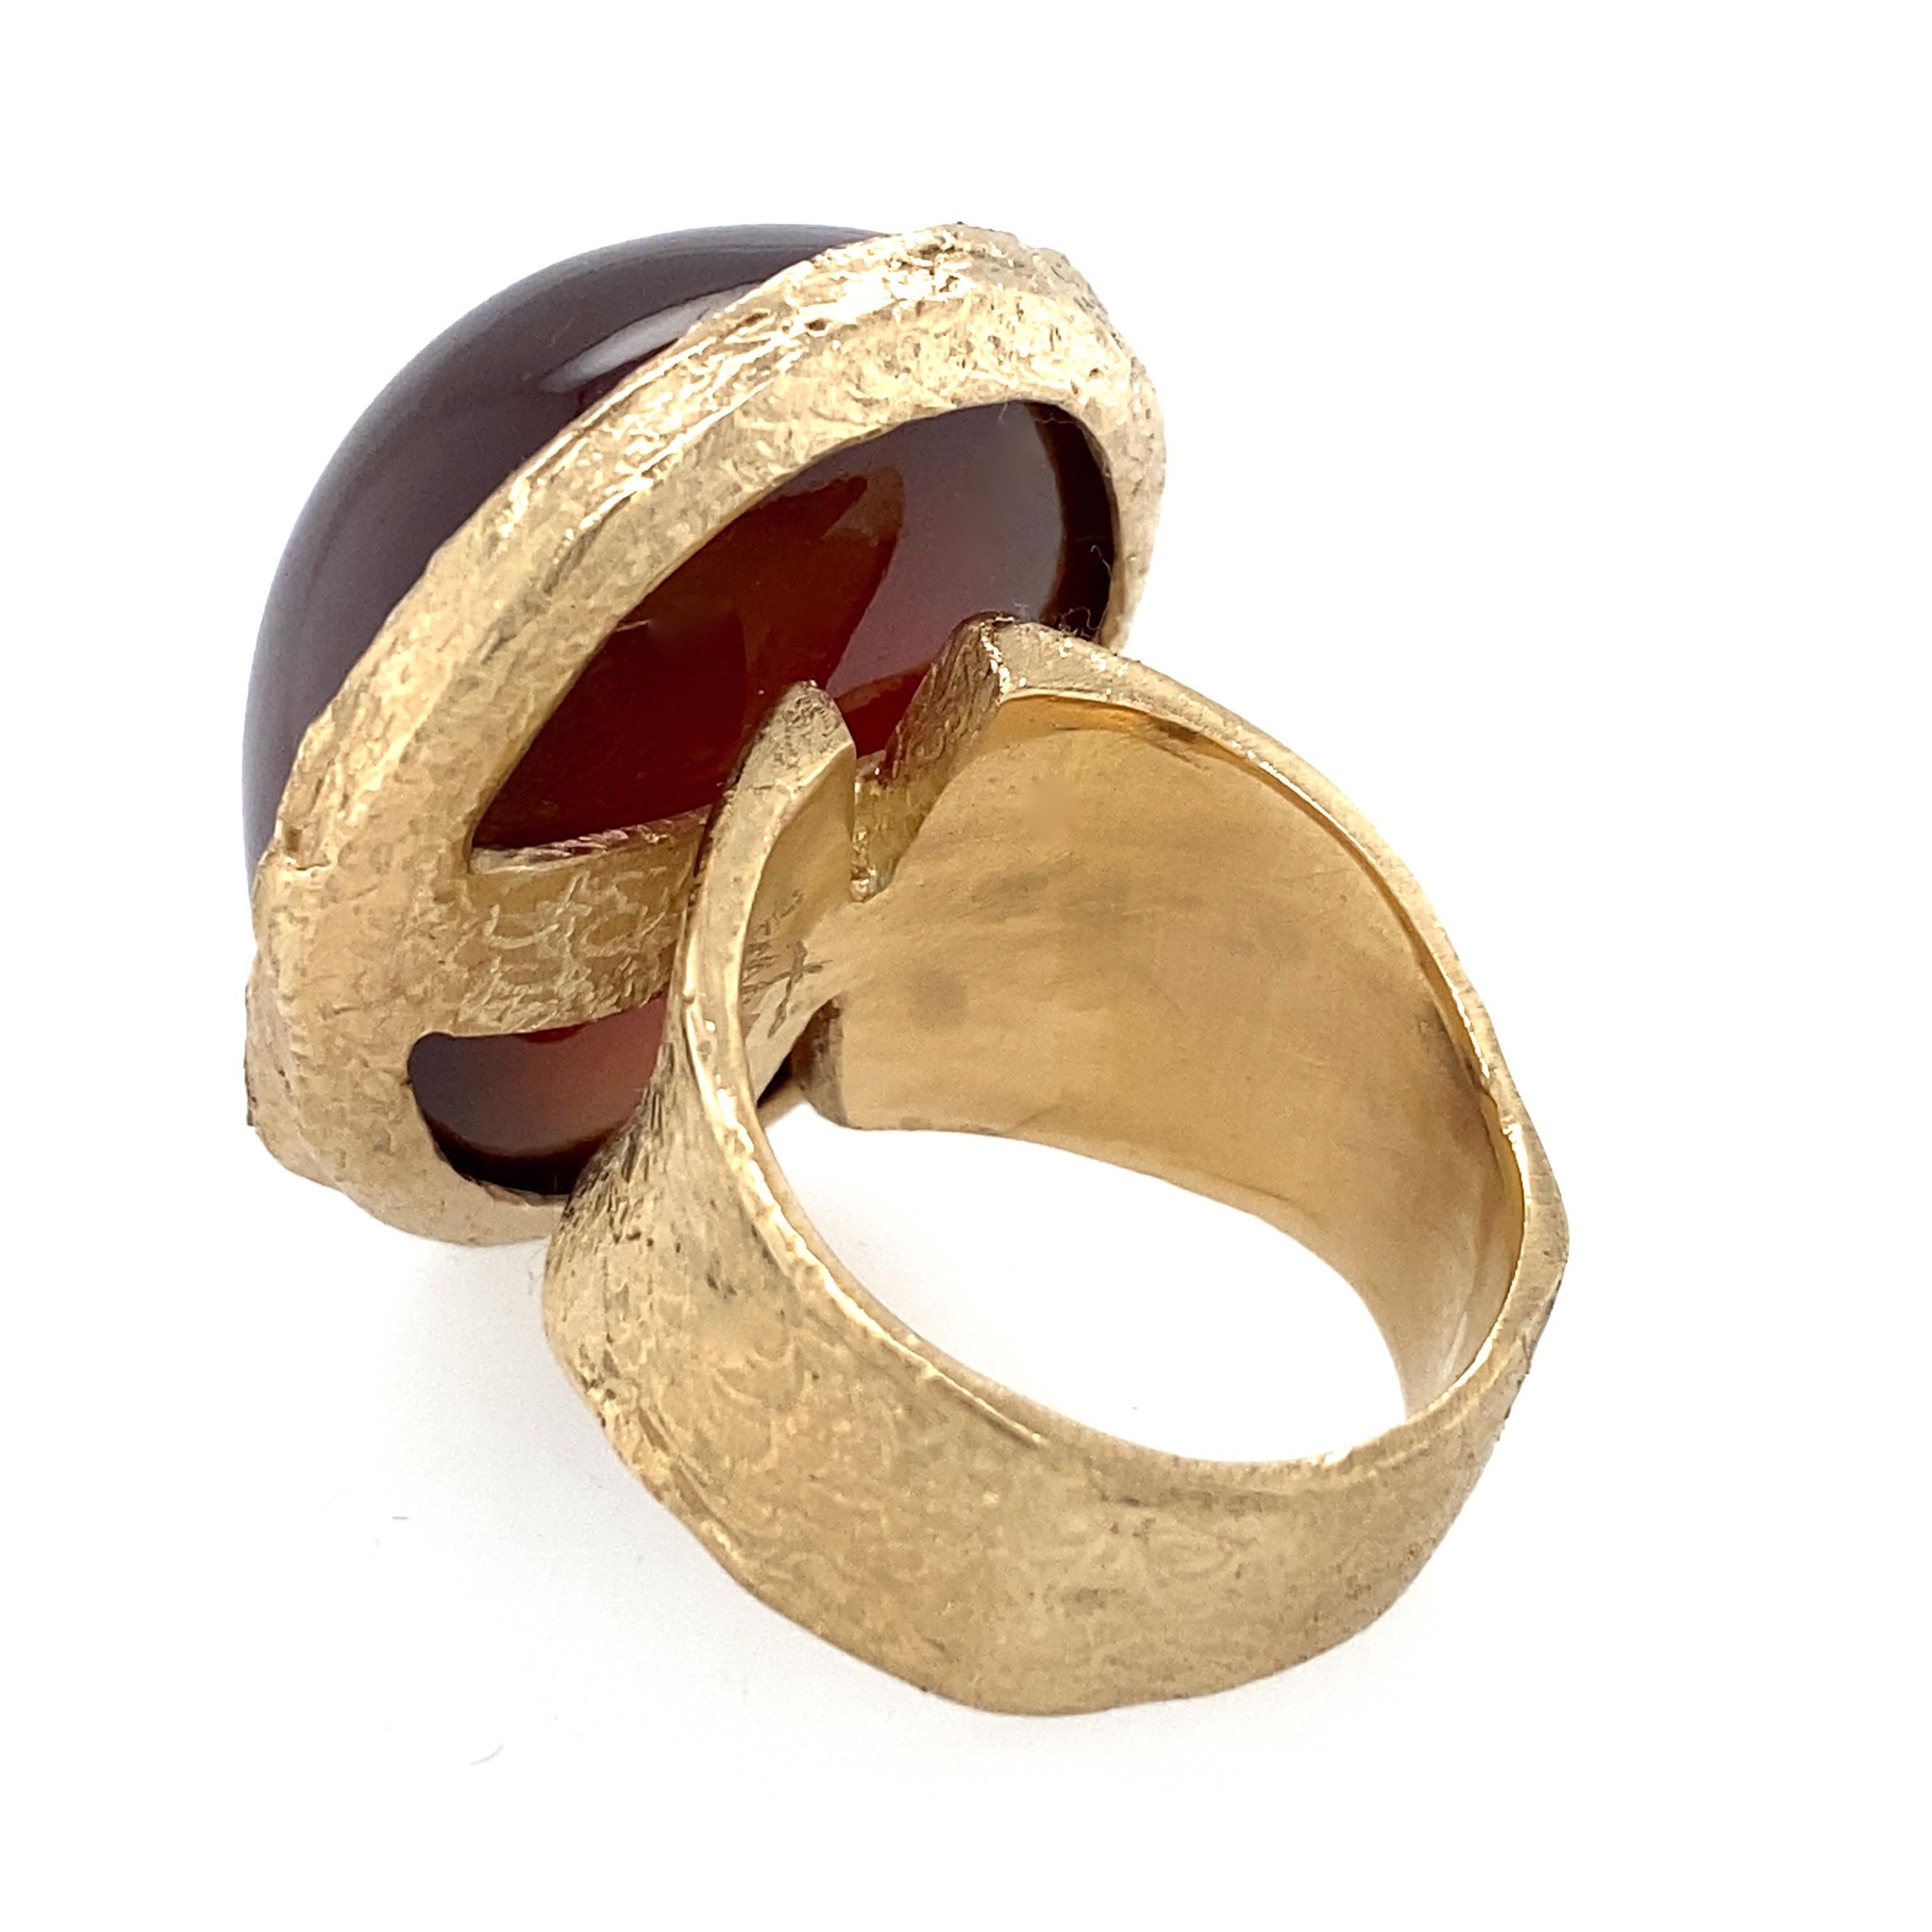 Oversized Modern Cocktail Ring with 95 Carat Almandine Garnet in Yellow Gold 5